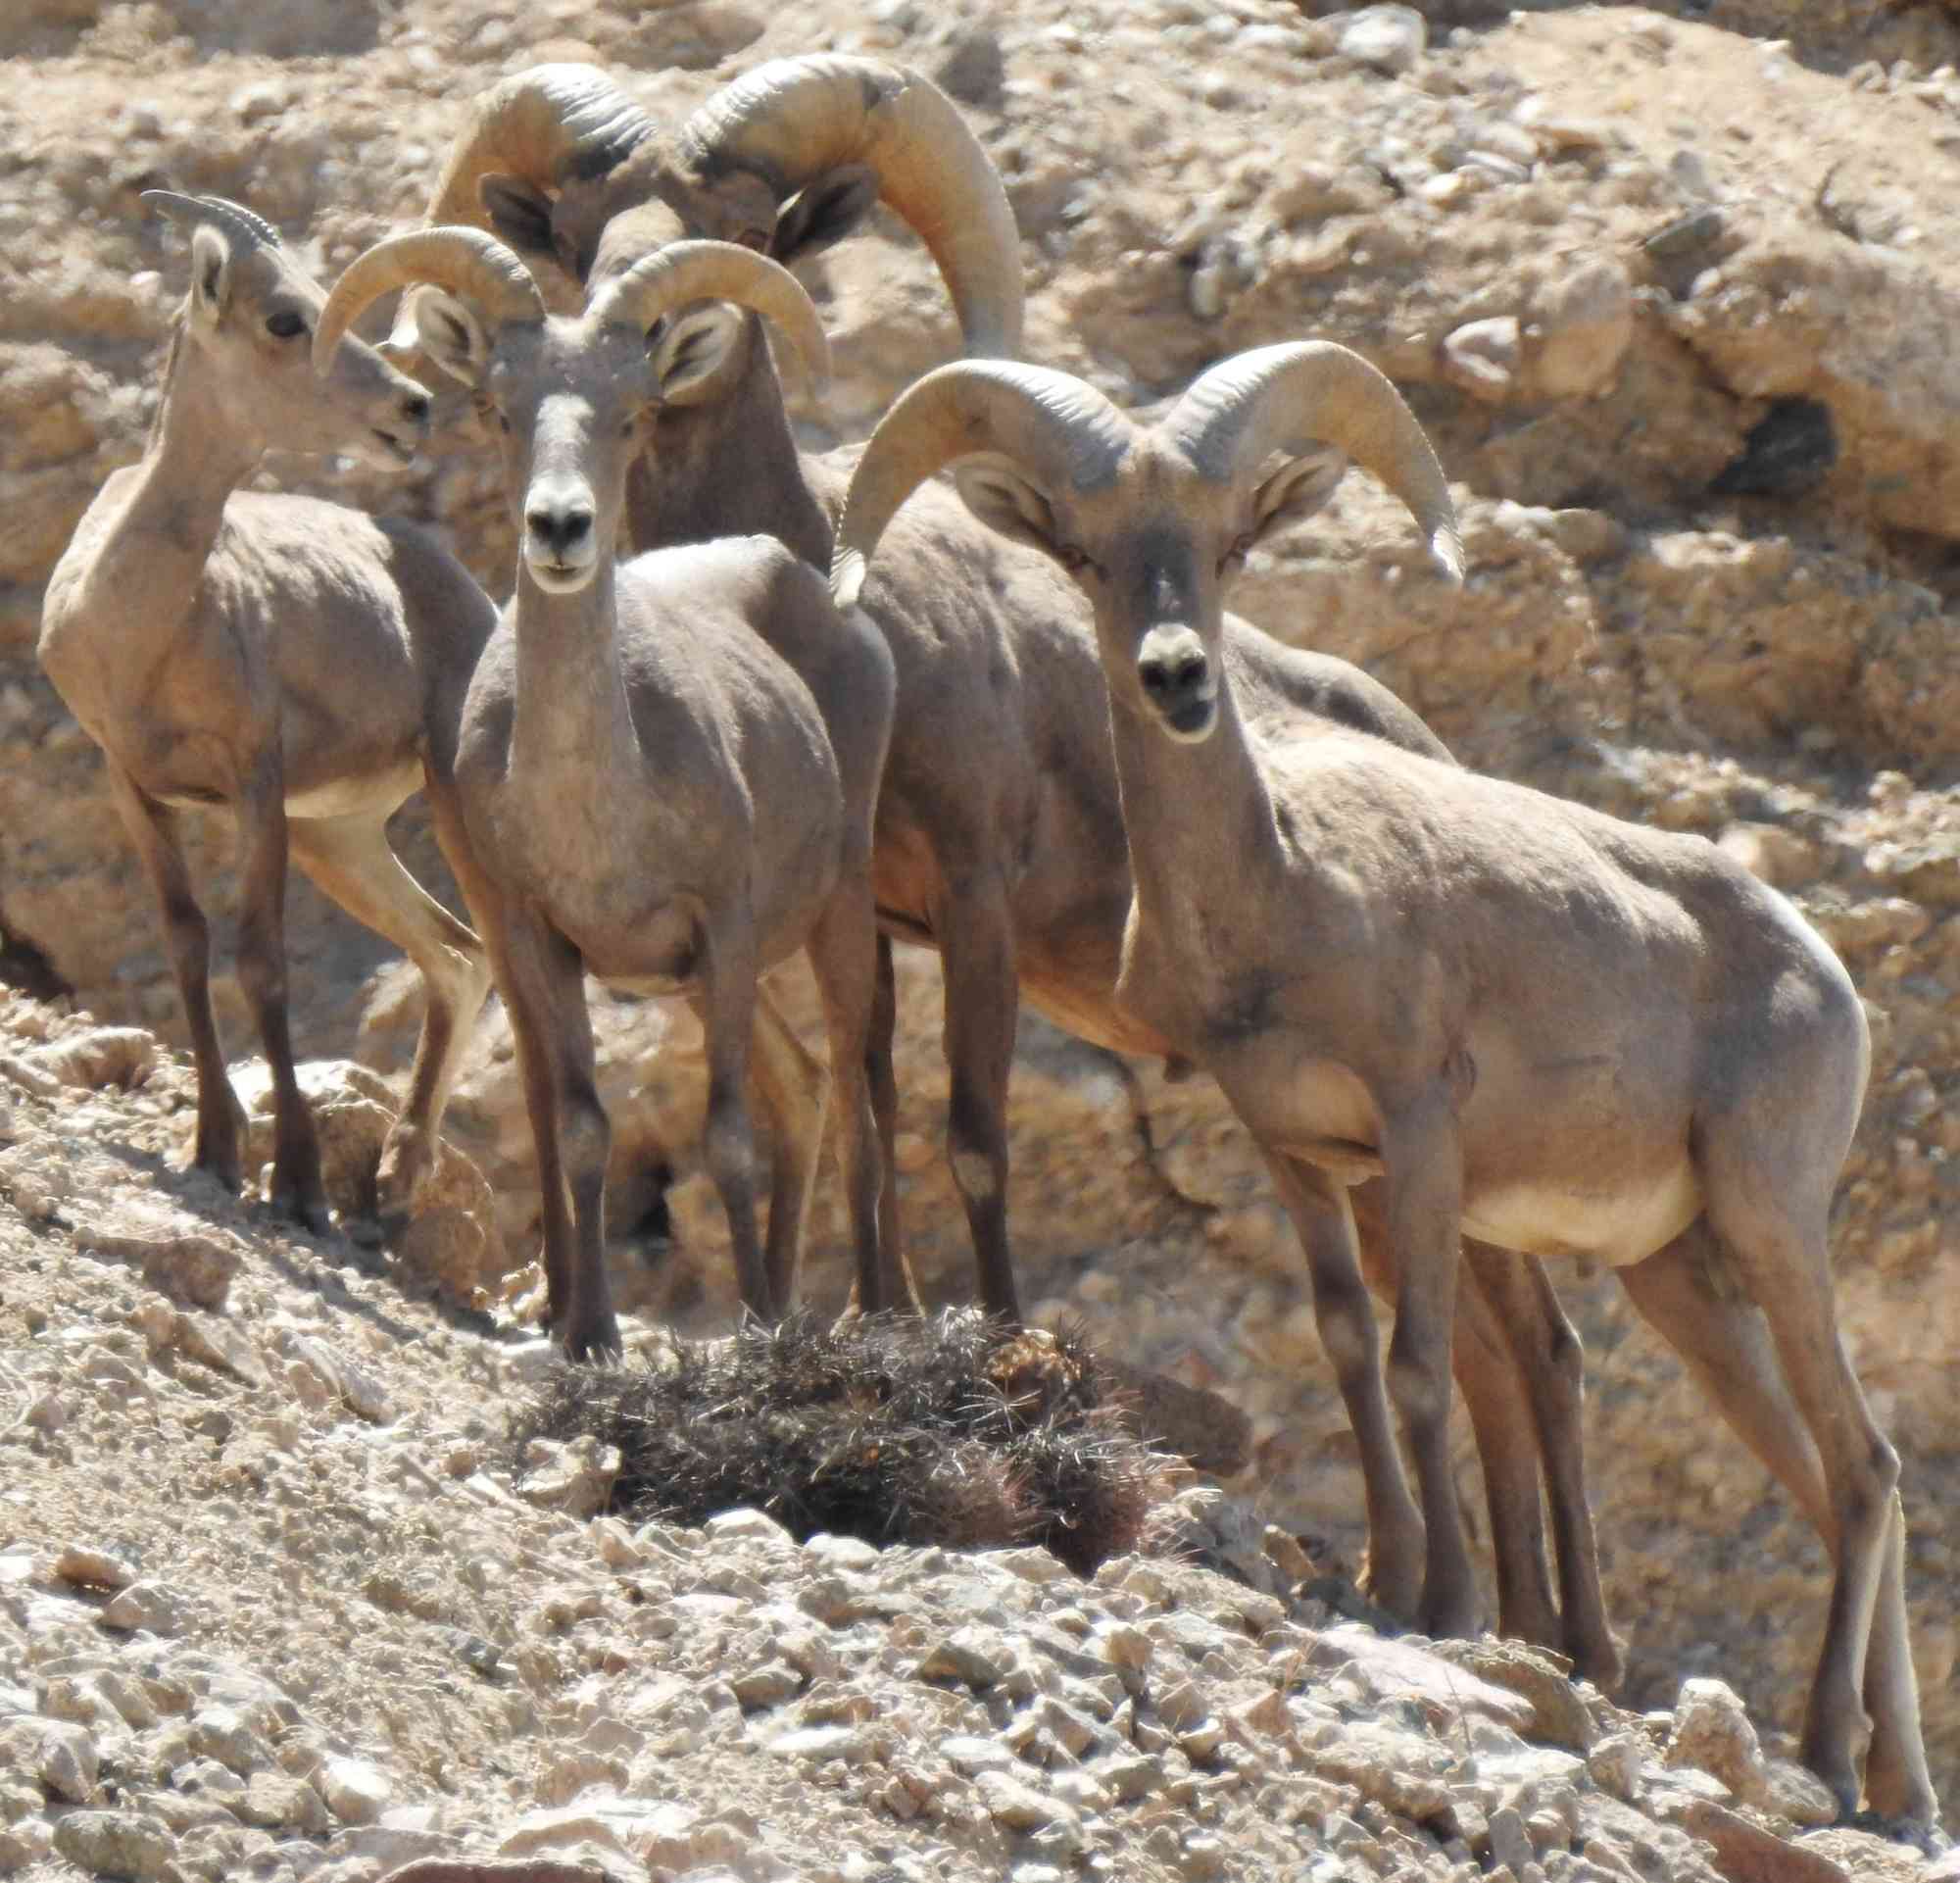 Desert bighorn sheep at Afton Canyon Area of Critical Environmental Concern (ACEC), within the Mojave Trails National Monument Tom Egan/Defenders of Wildlife